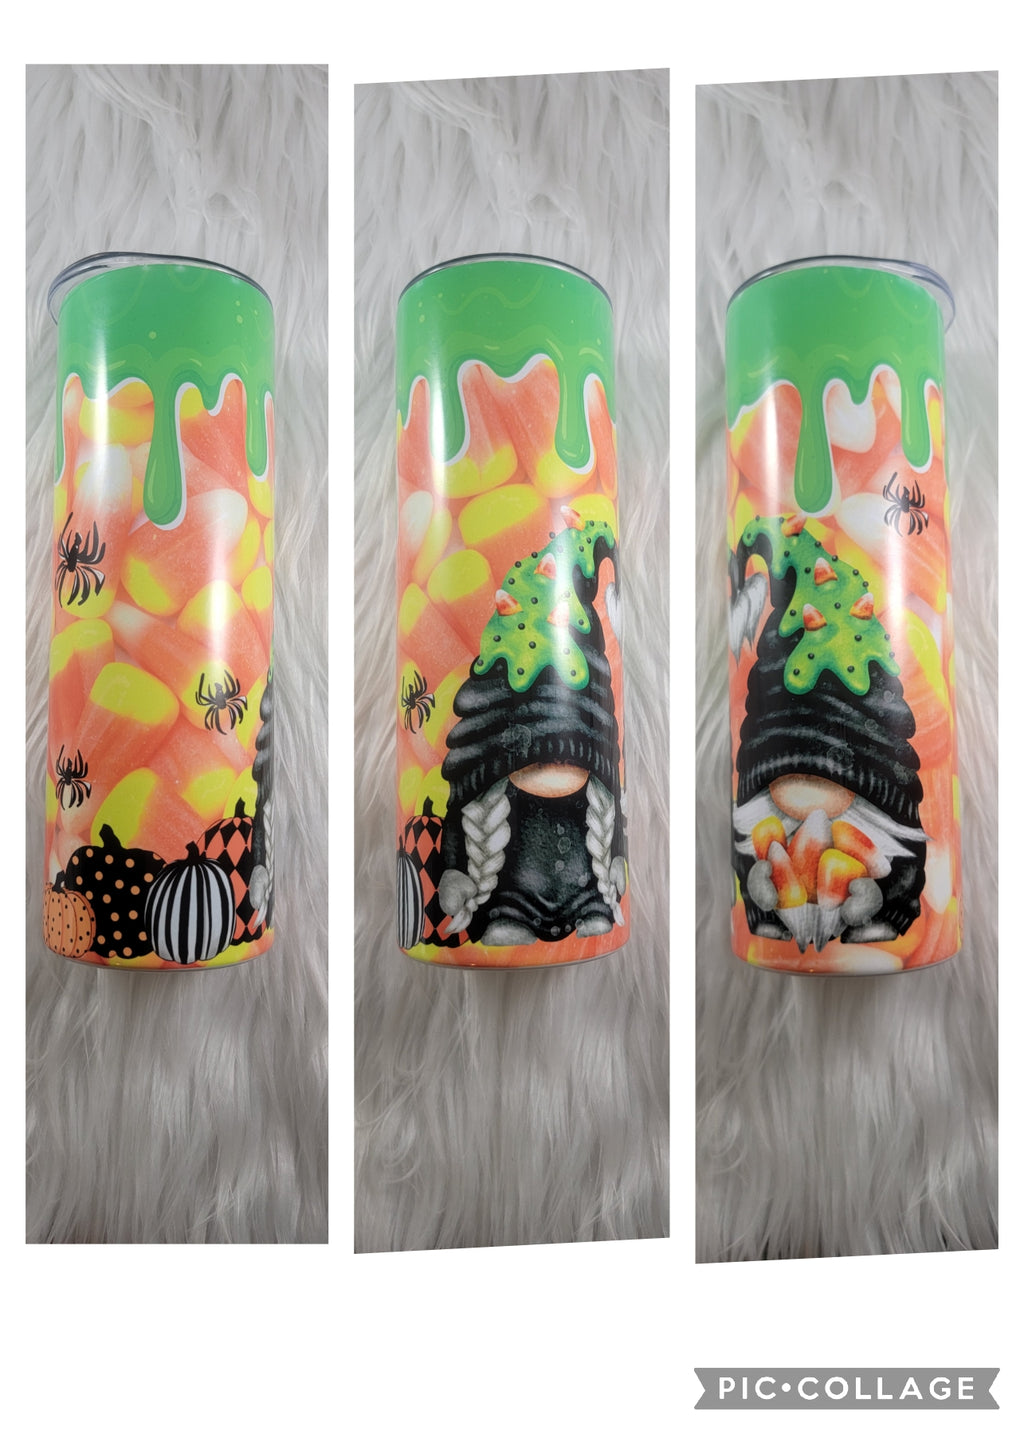 Spooky Candy Gnome tumbler